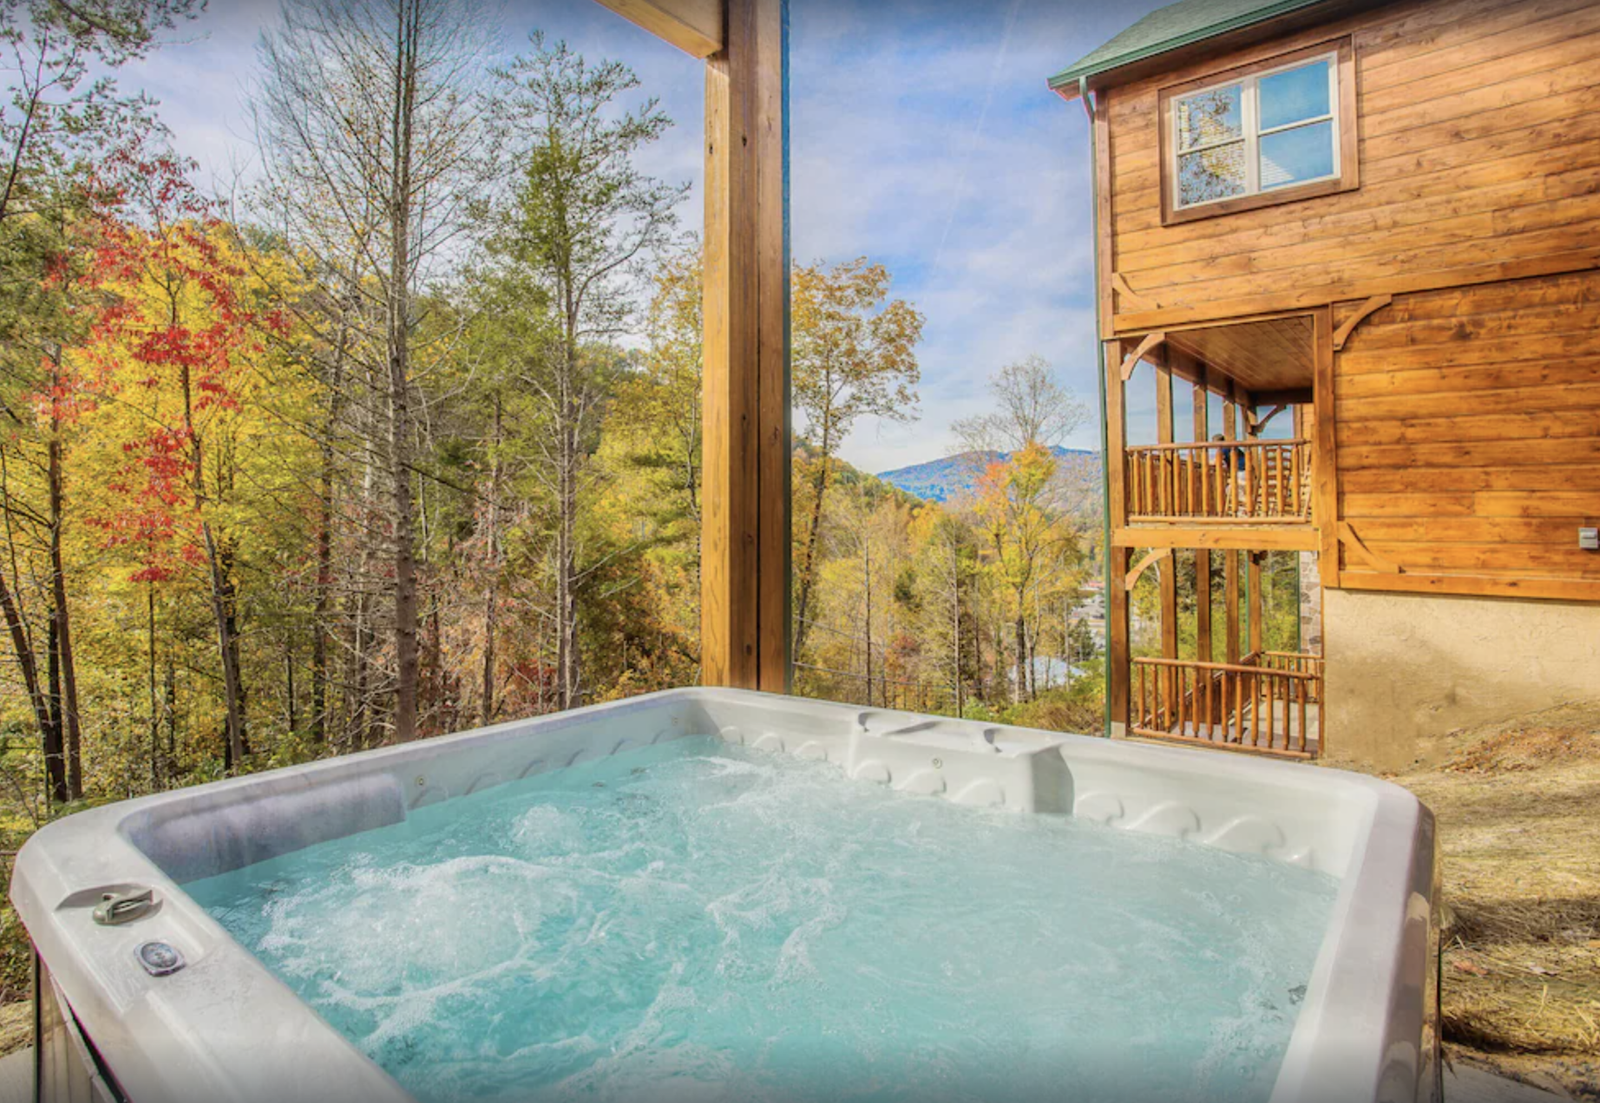 cabins in tennessee mountains with indoor pool